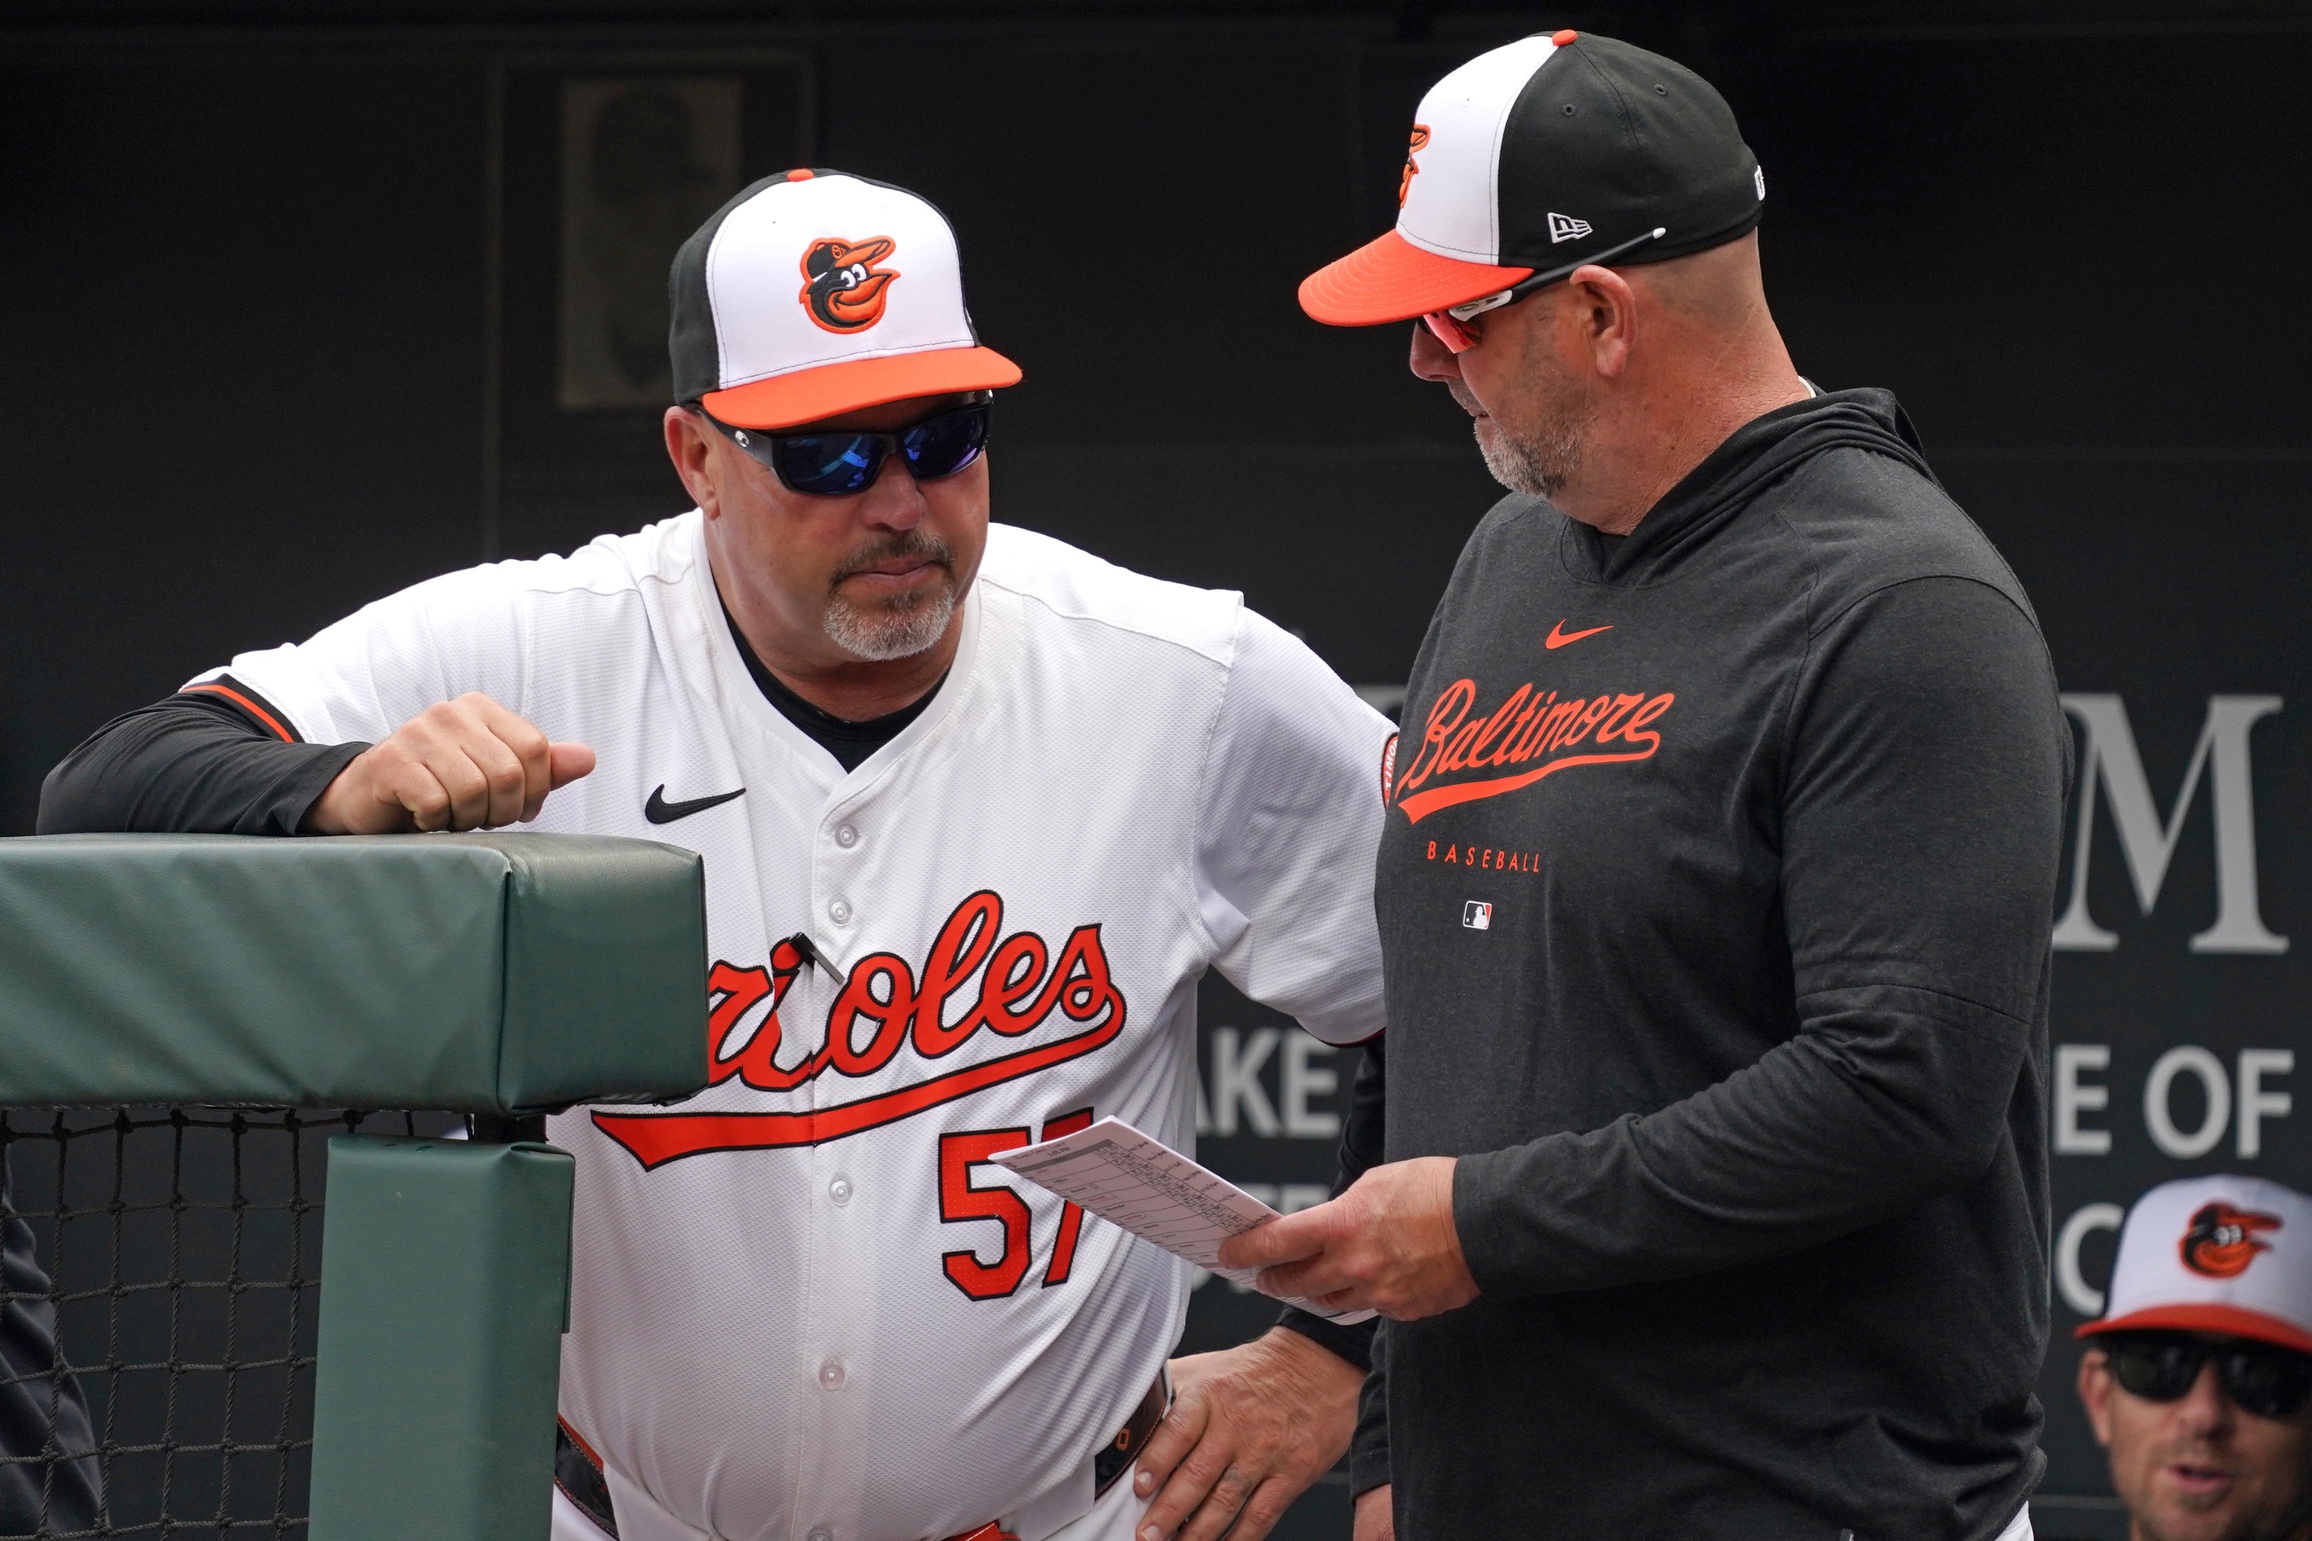 Orioles Future Hall of Famer is Day-to-Day at This Point